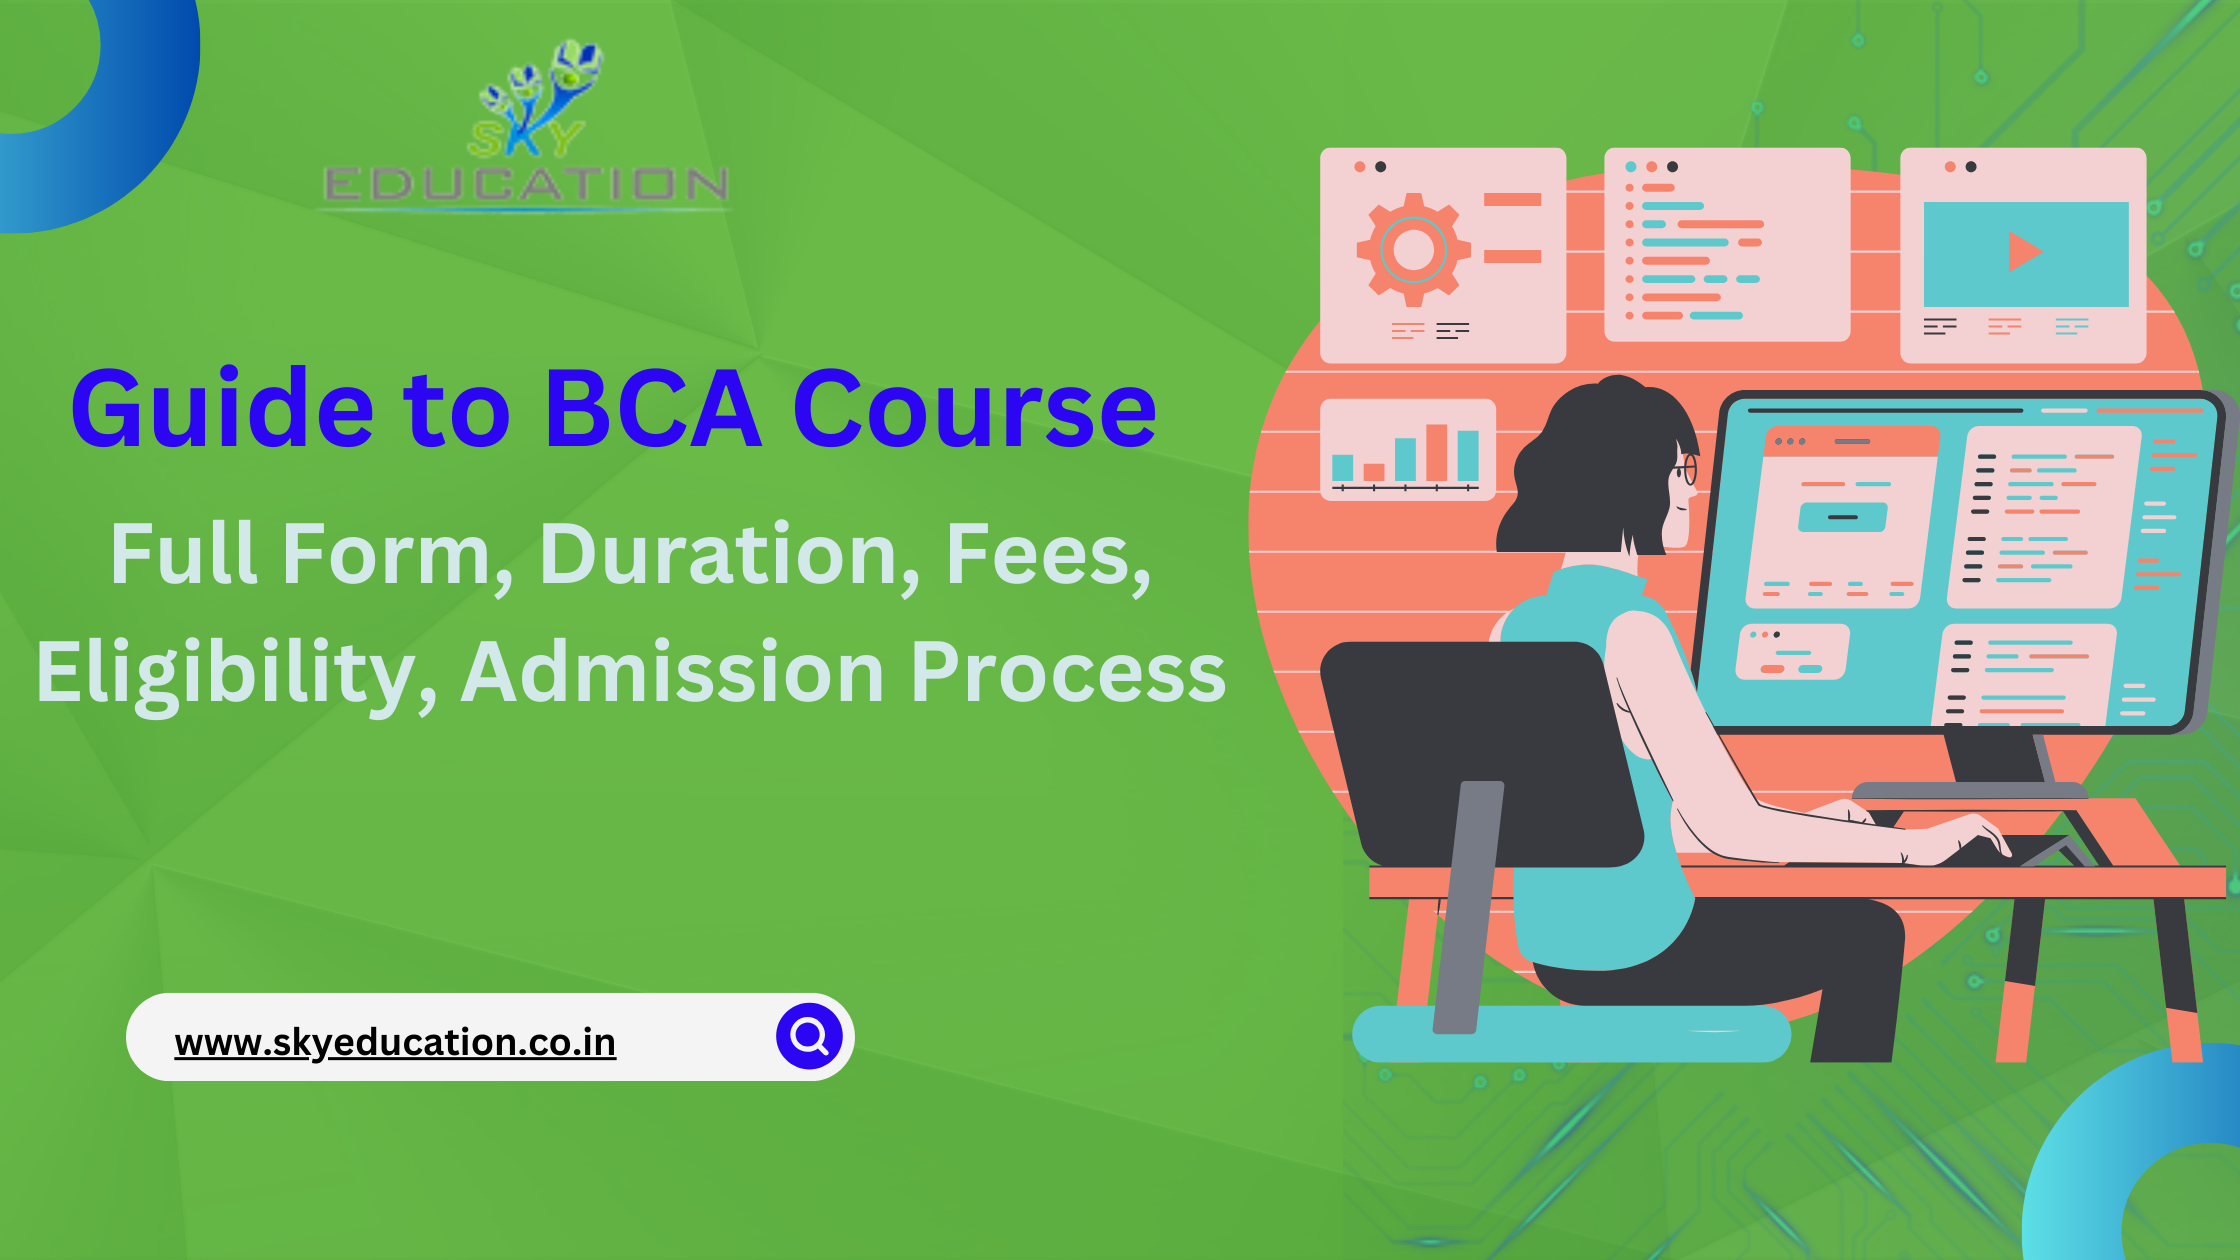 BCA Courses: Full Form, Duration, Fees, Eligibility, and More